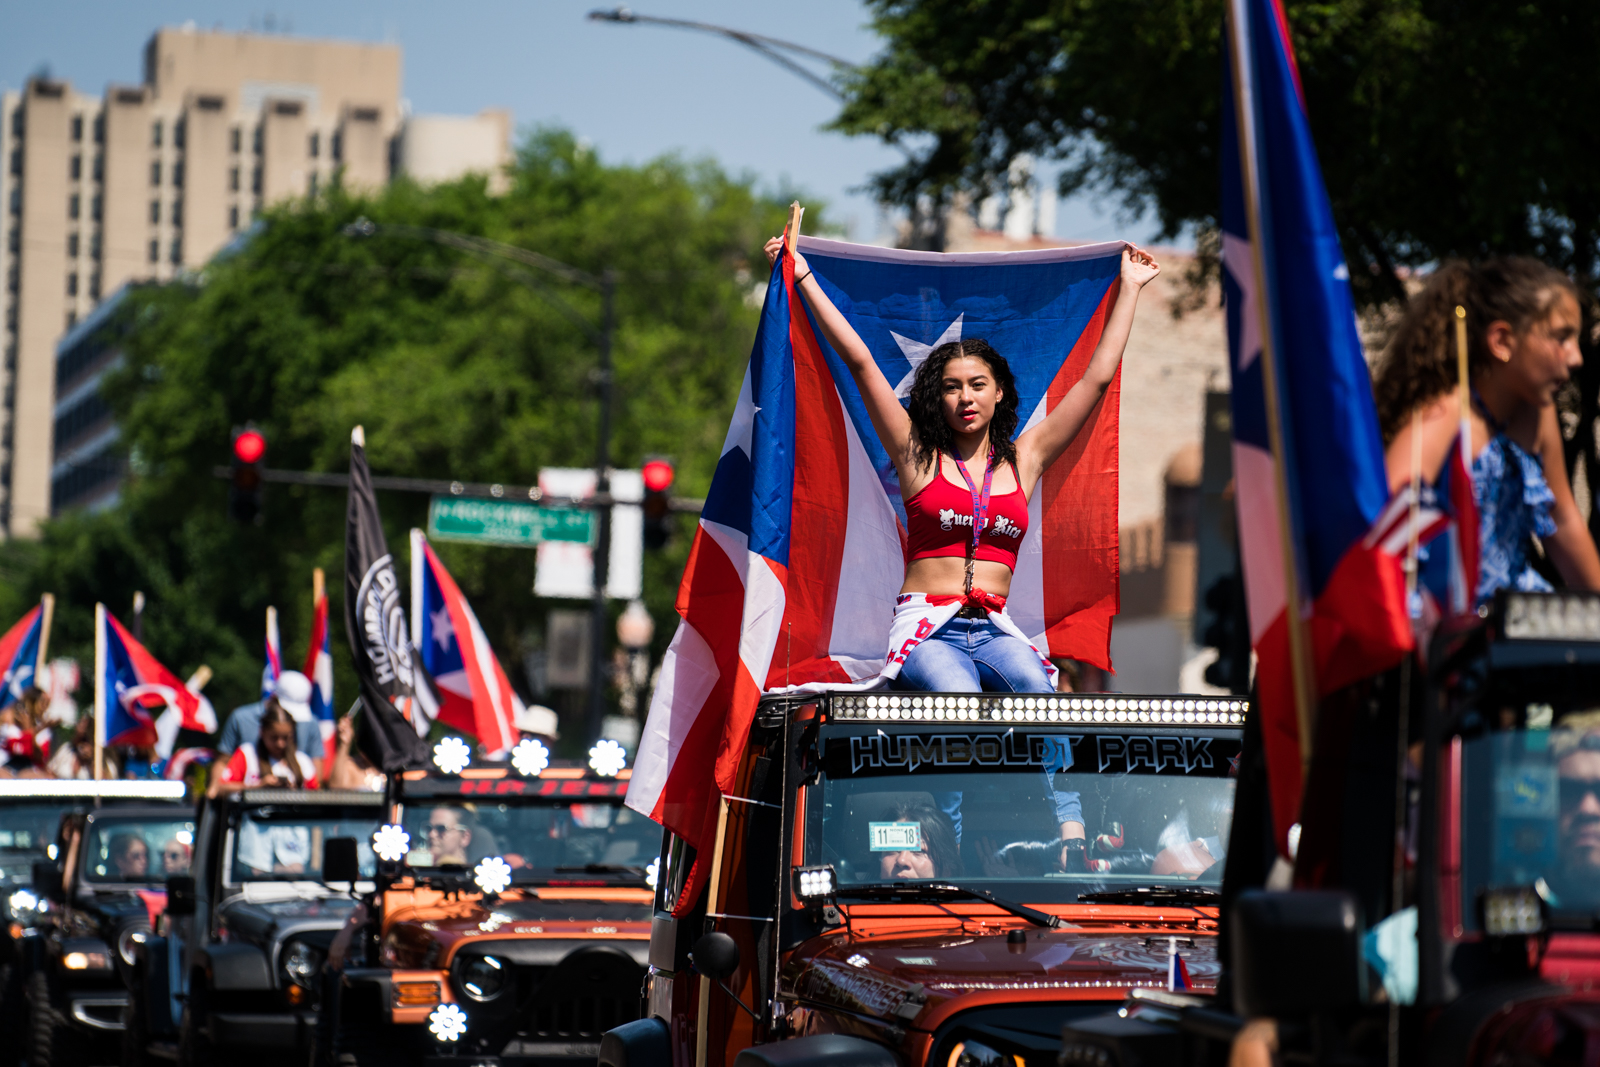 Photos Puerto Rican People's Parade in Humboldt Park Chicago Magazine